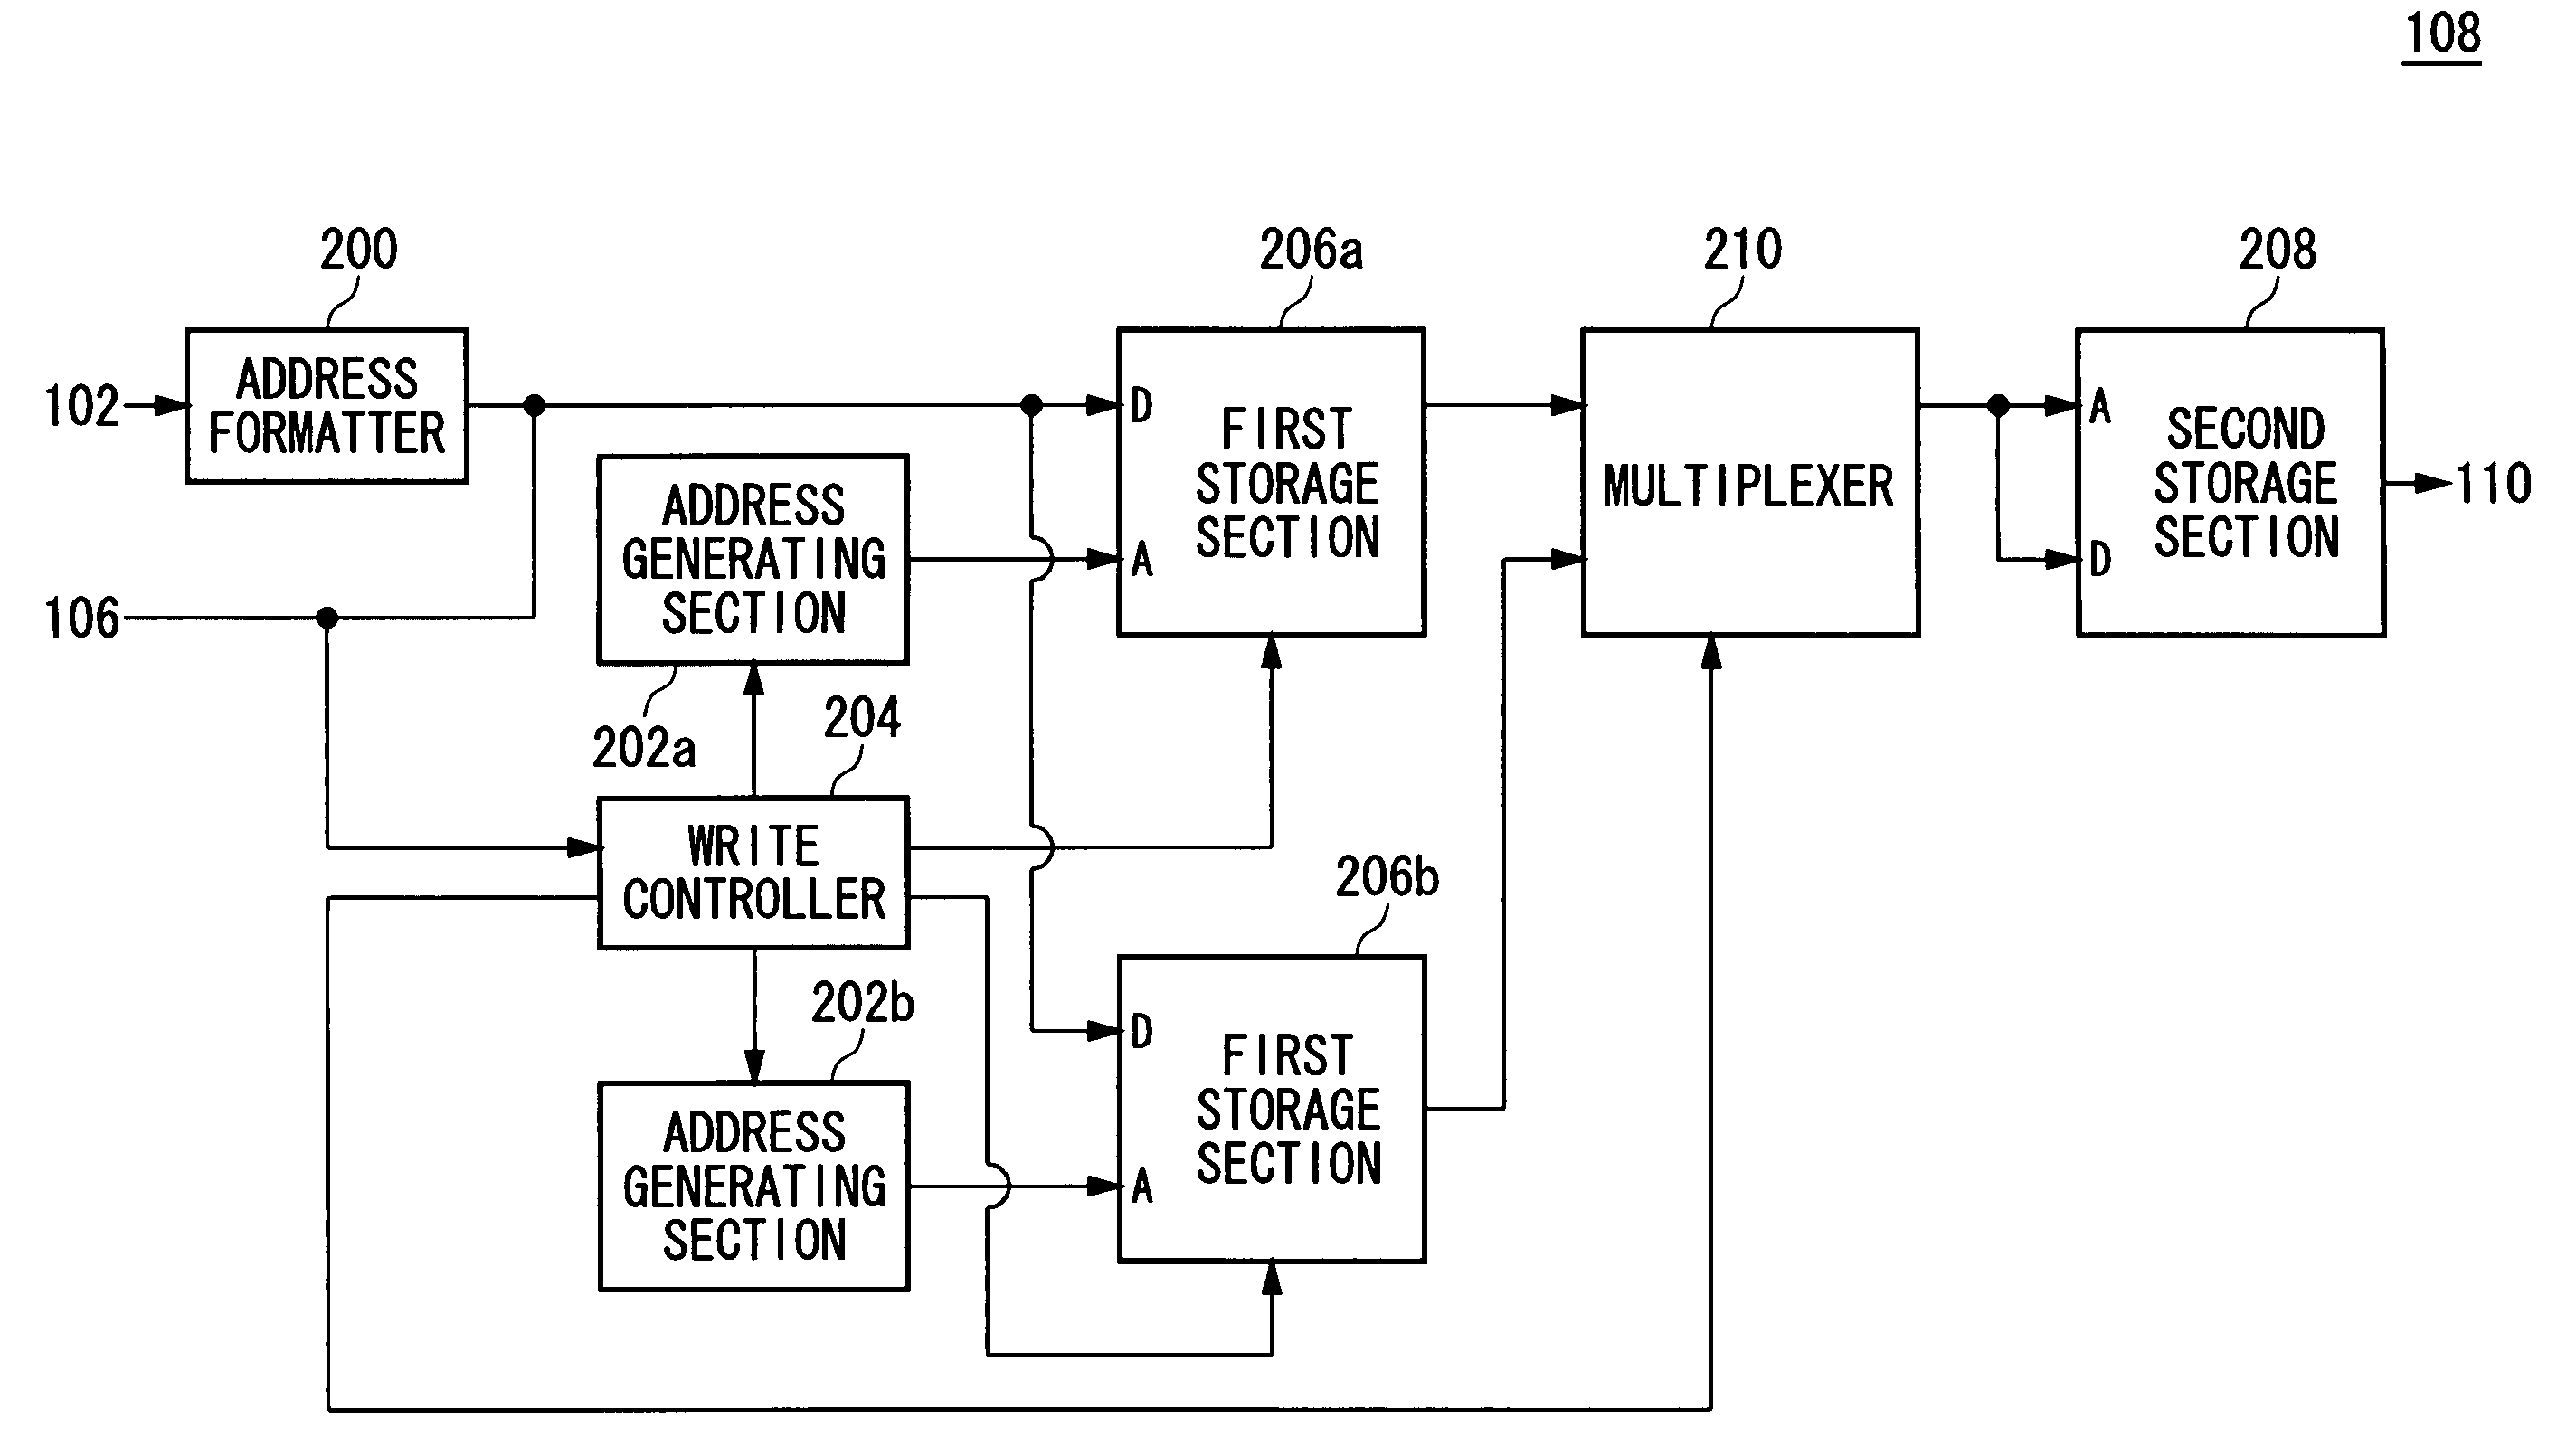 Memory tester having defect analysis memory with two storage sections